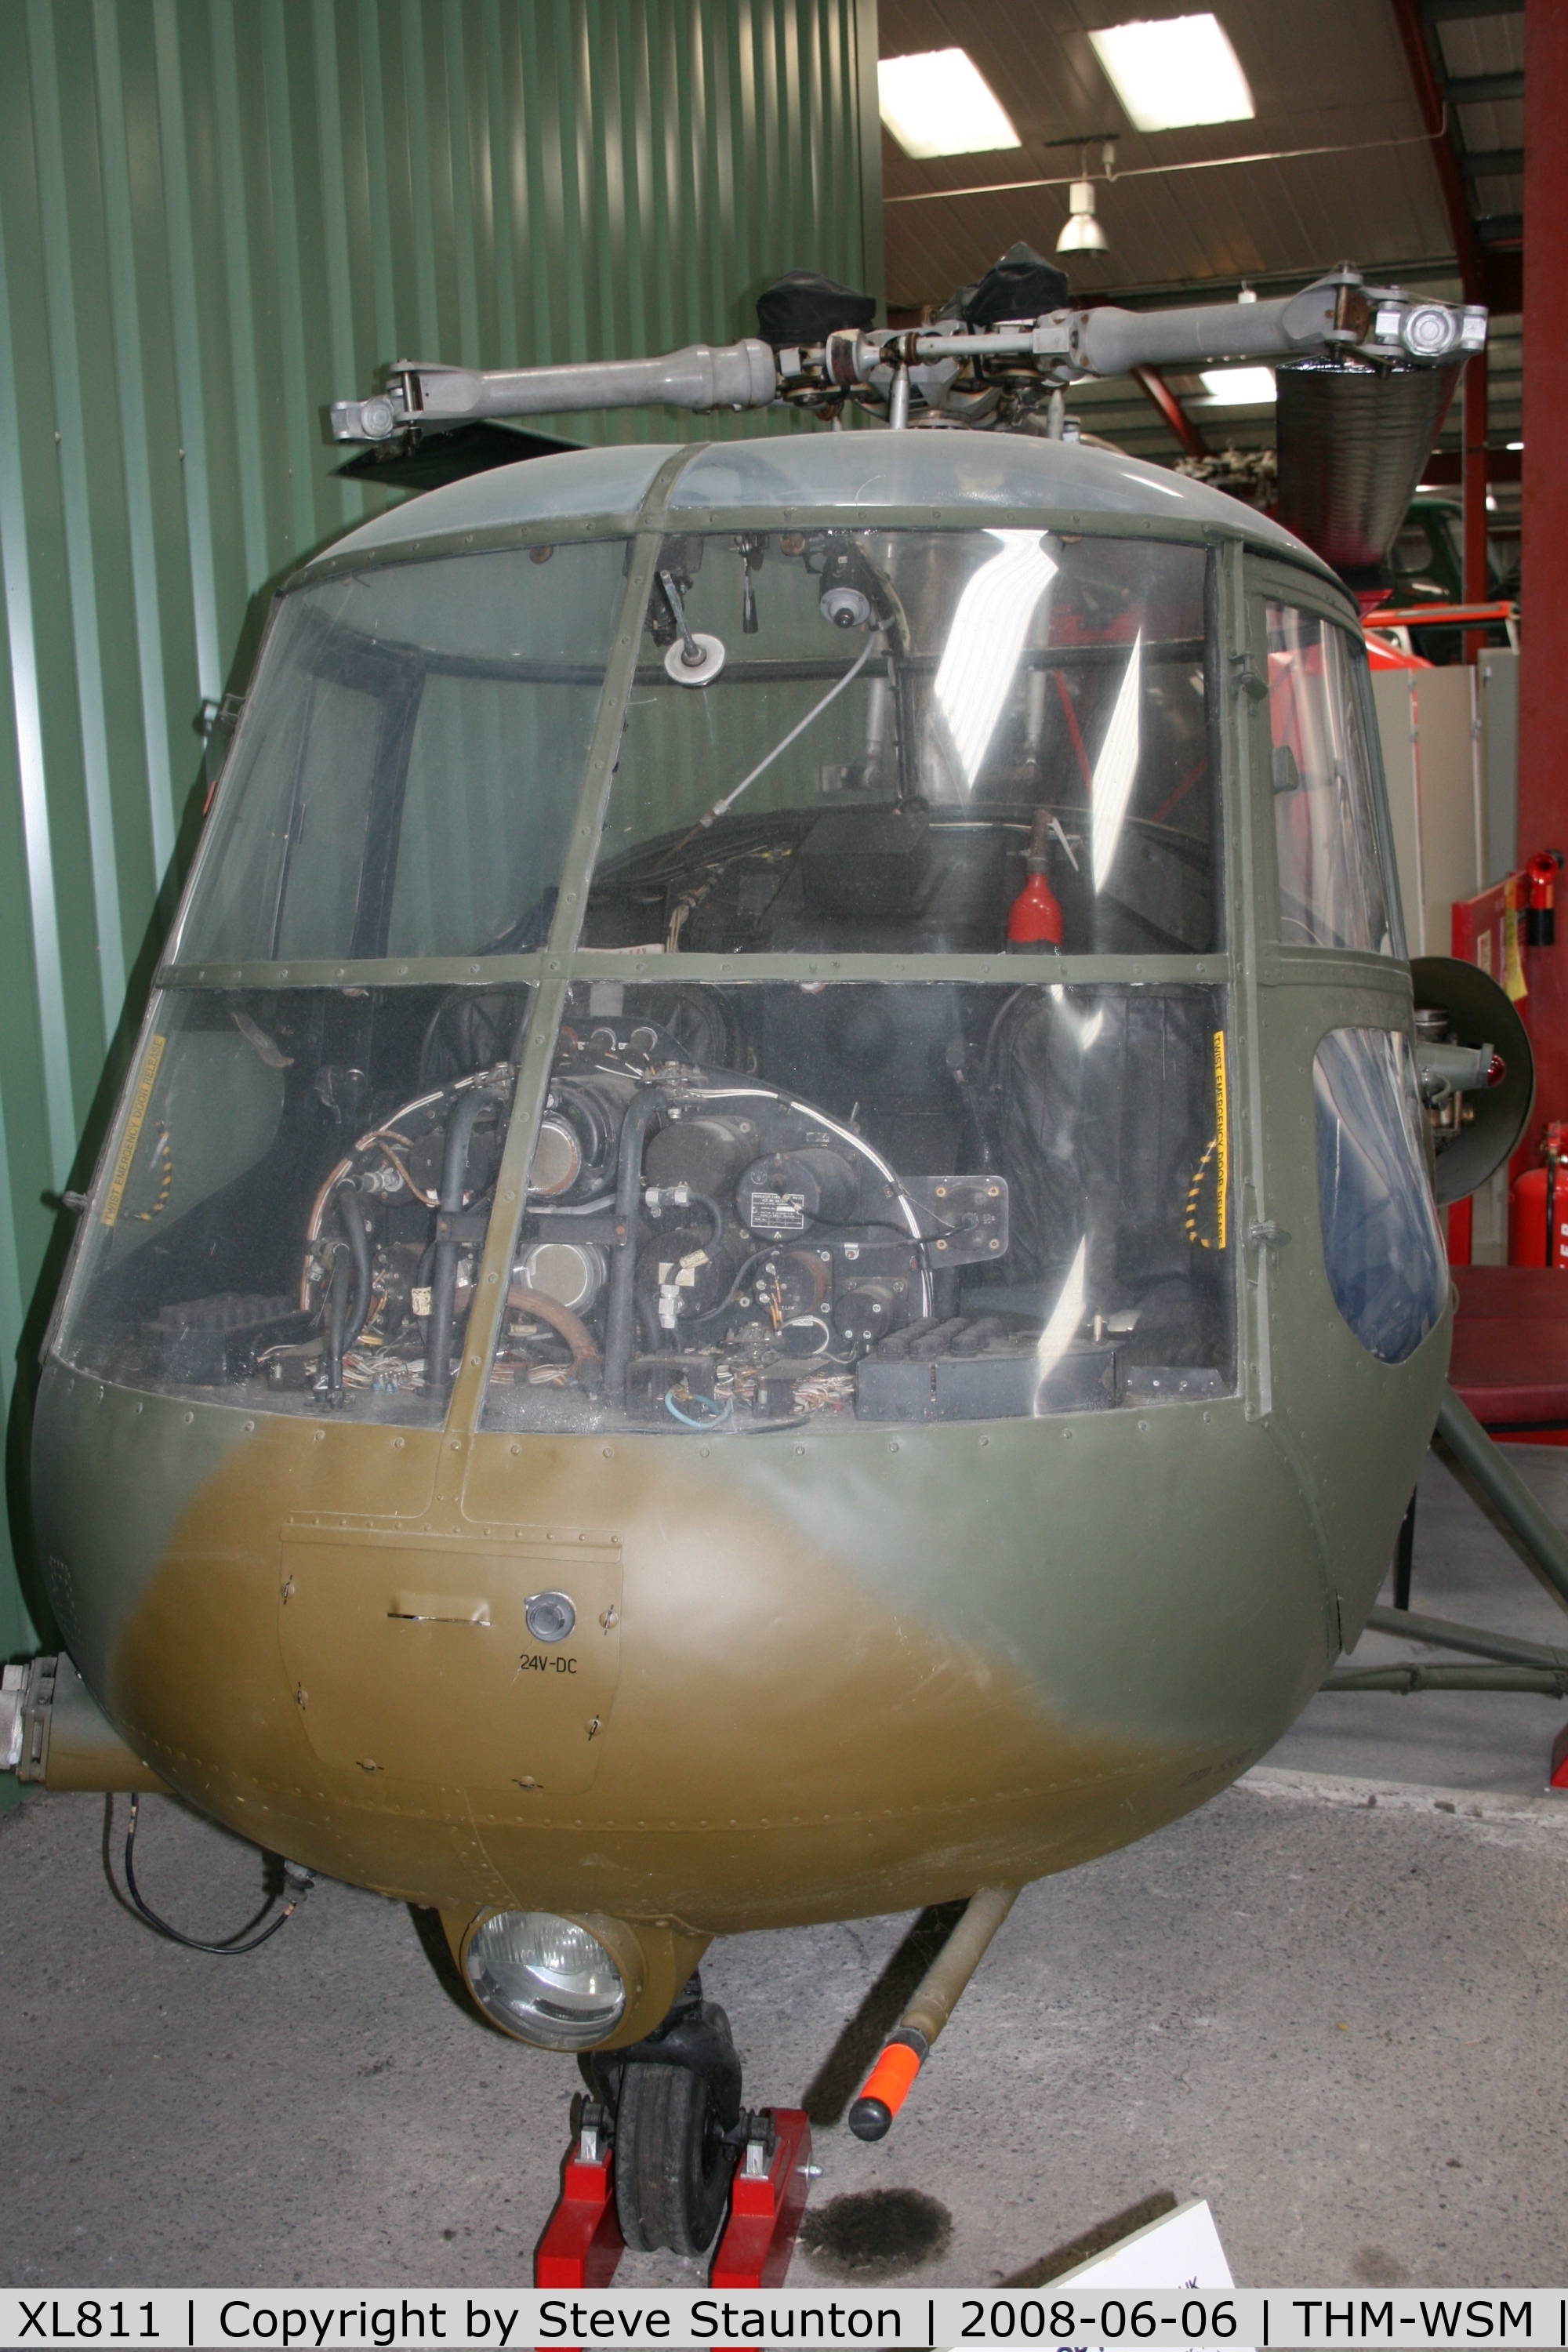 XL811, 1958 Saunders-Roe Skeeter AOP.12 C/N S2/5096, Taken at the Helicopter Museum (http://www.helicoptermuseum.co.uk/)